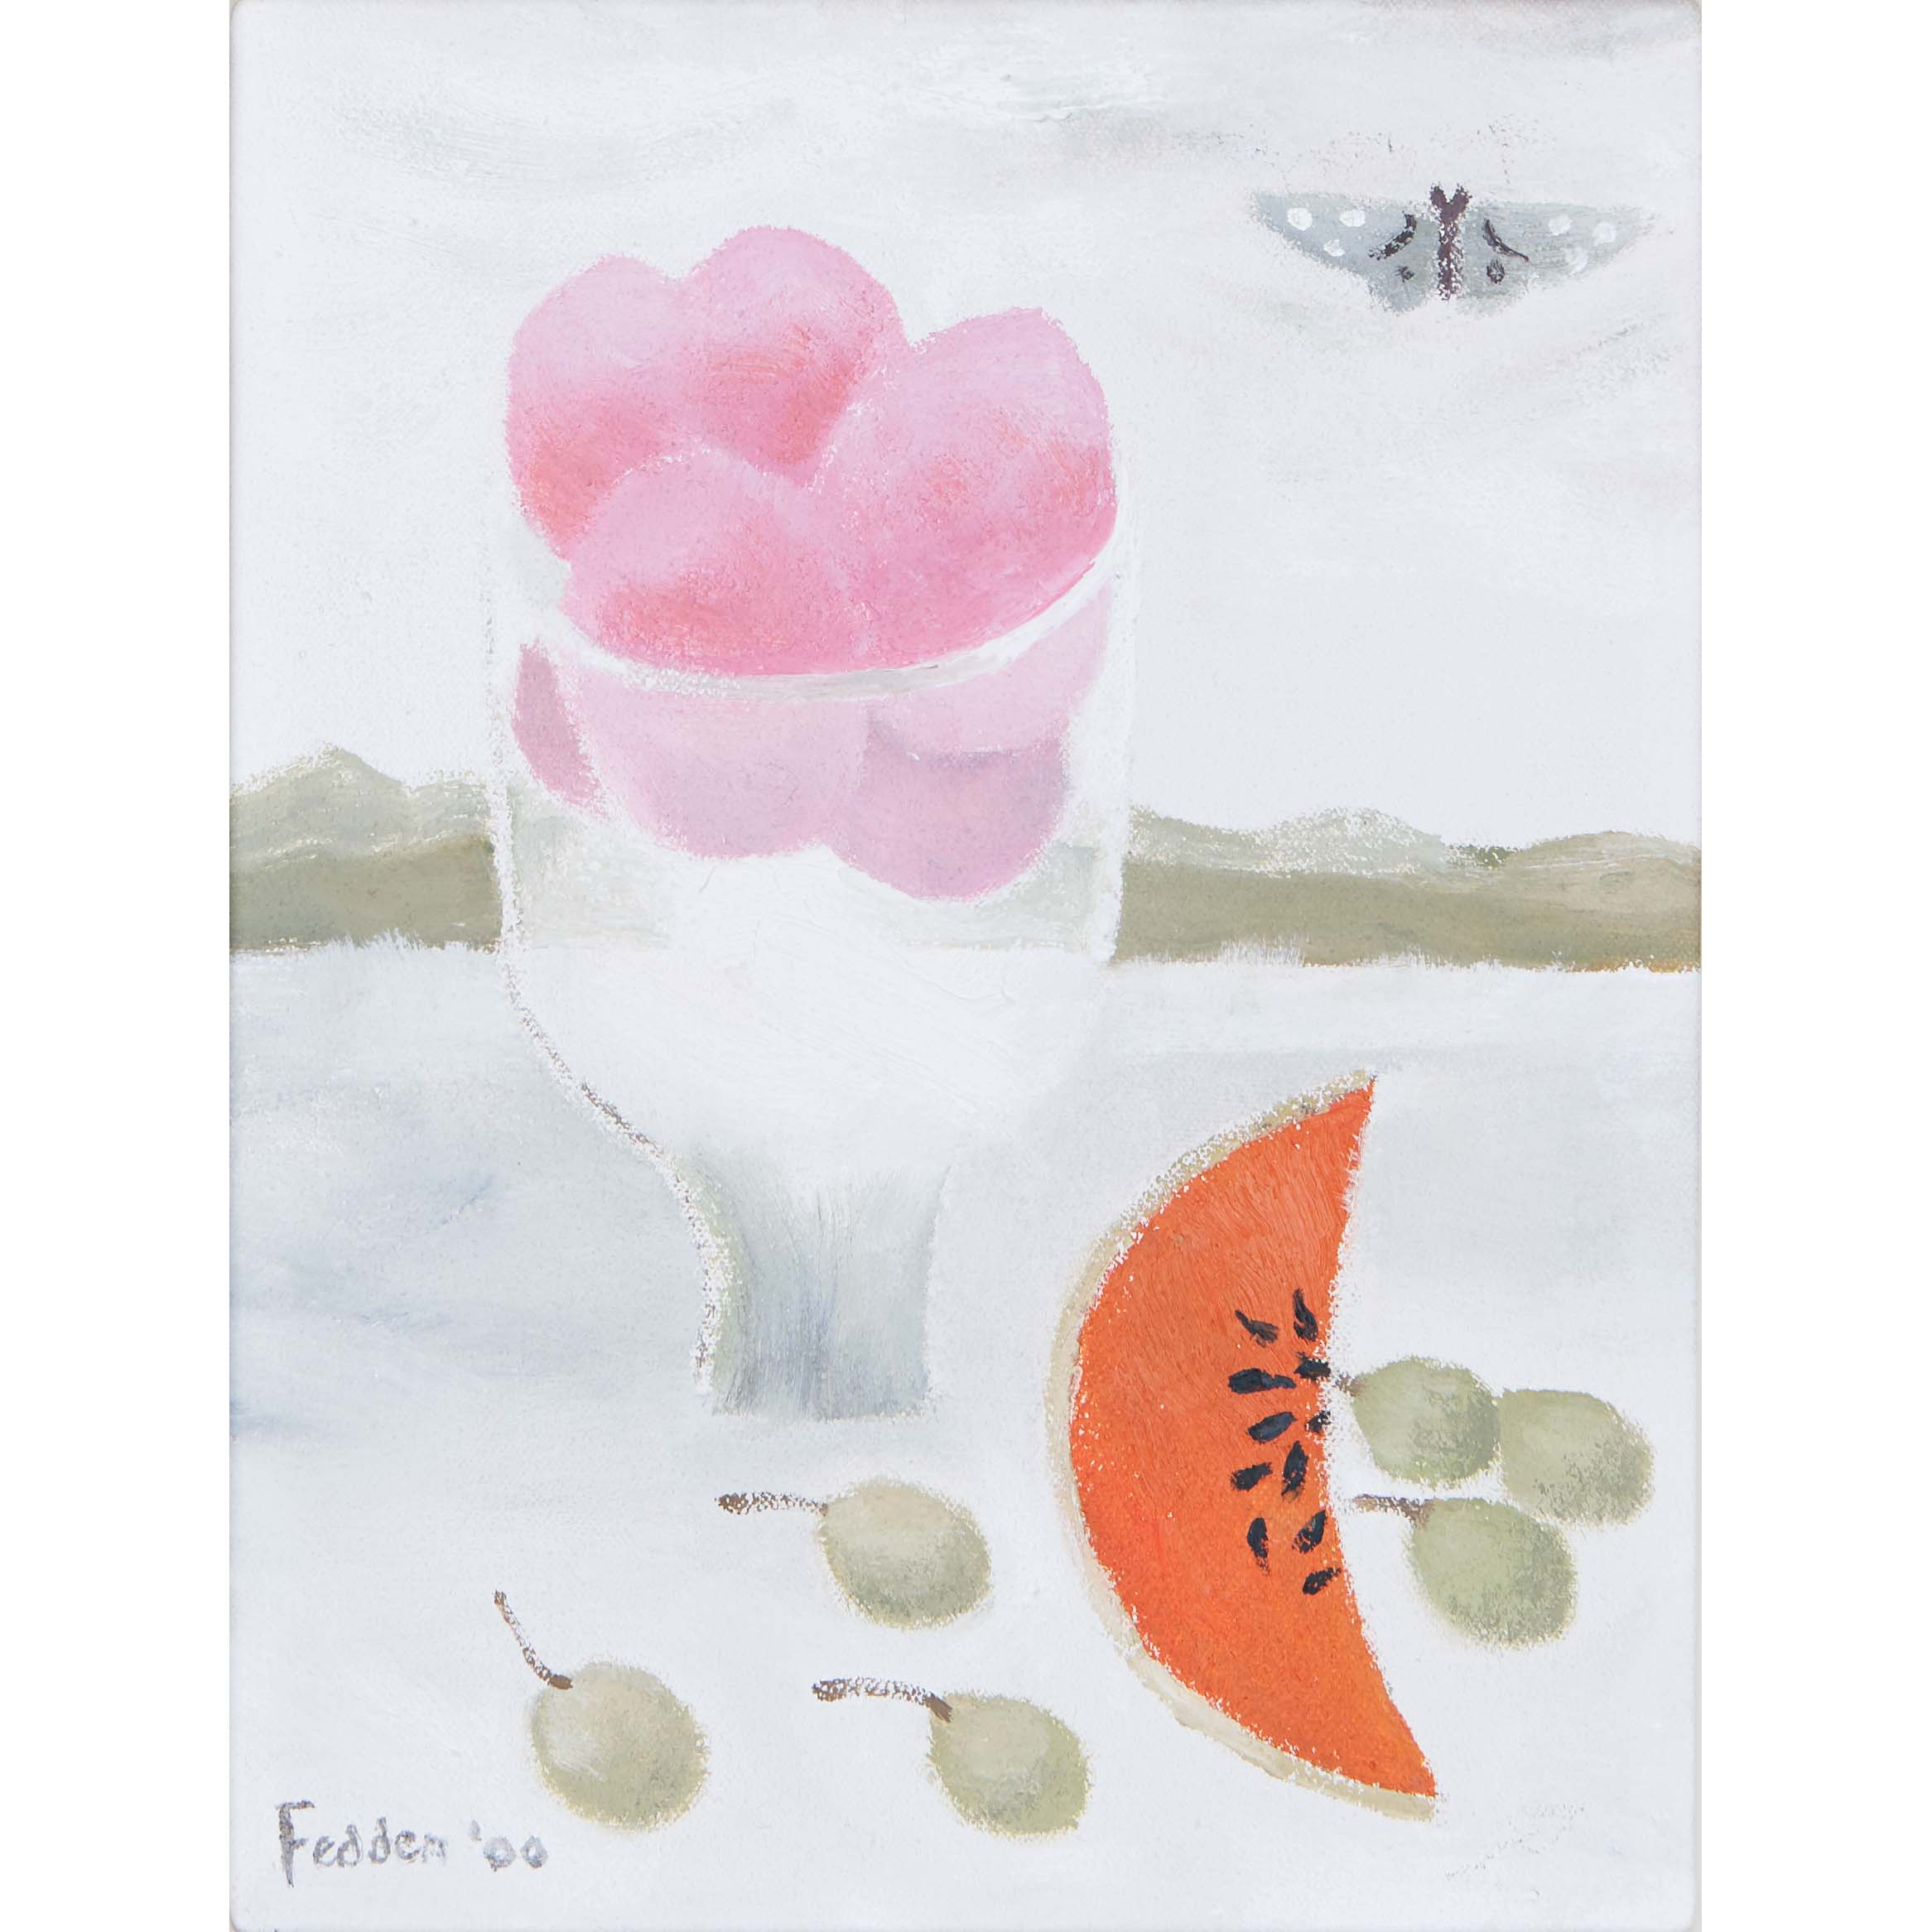 MARY FEDDEN. MELON. 2000. SOLD